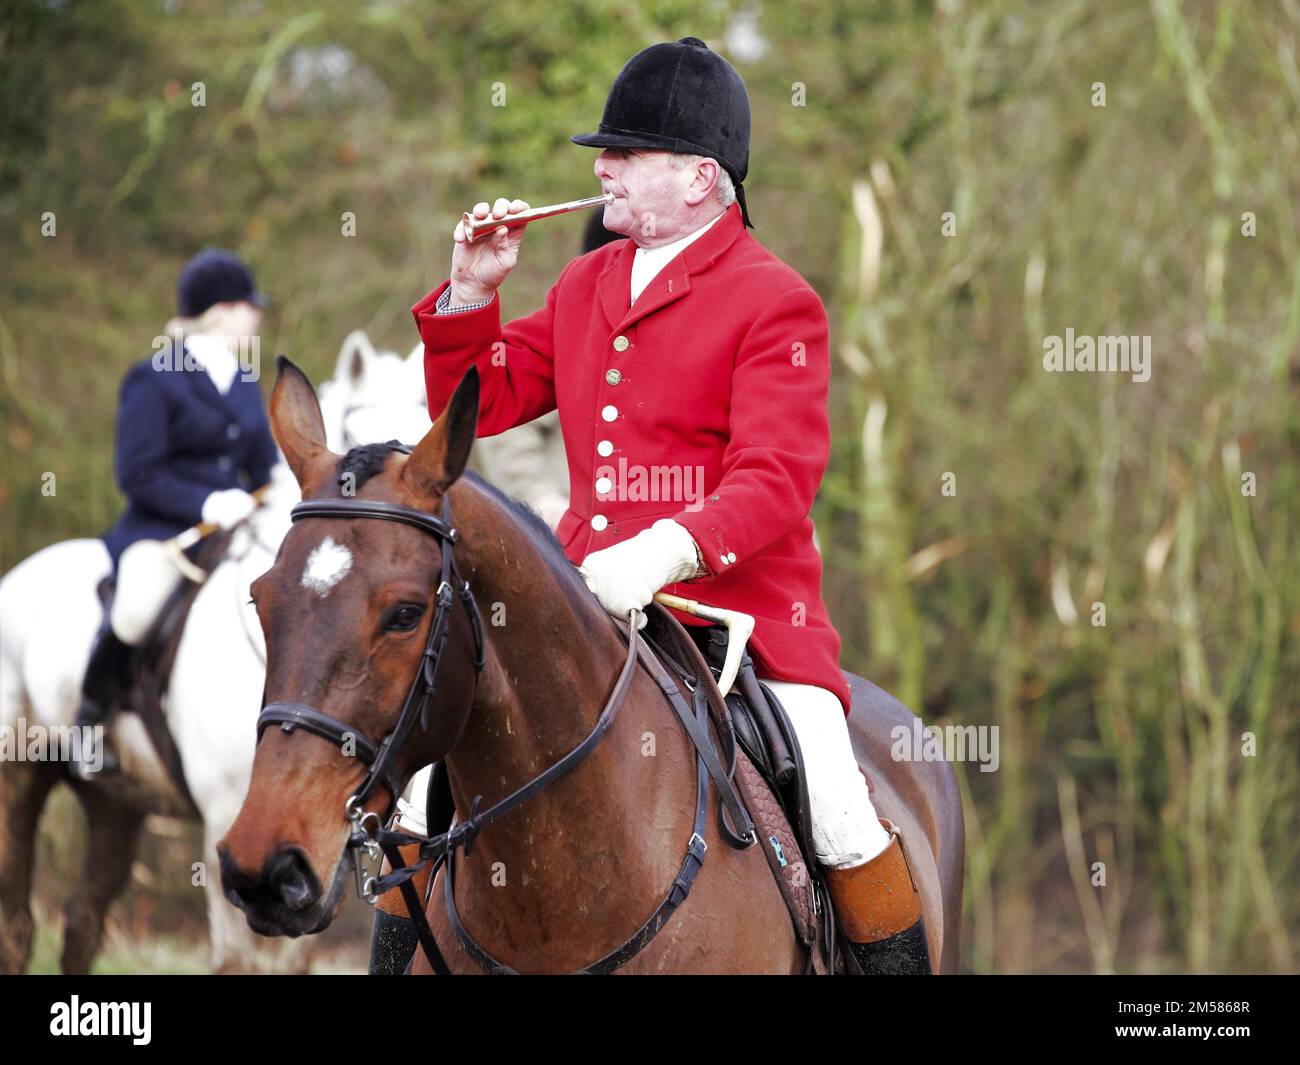 The Master of the fox hunt blows the trumpet to gather riders and hounds  in a field before the traditional Boxing Day fox hunt. Stock Photo